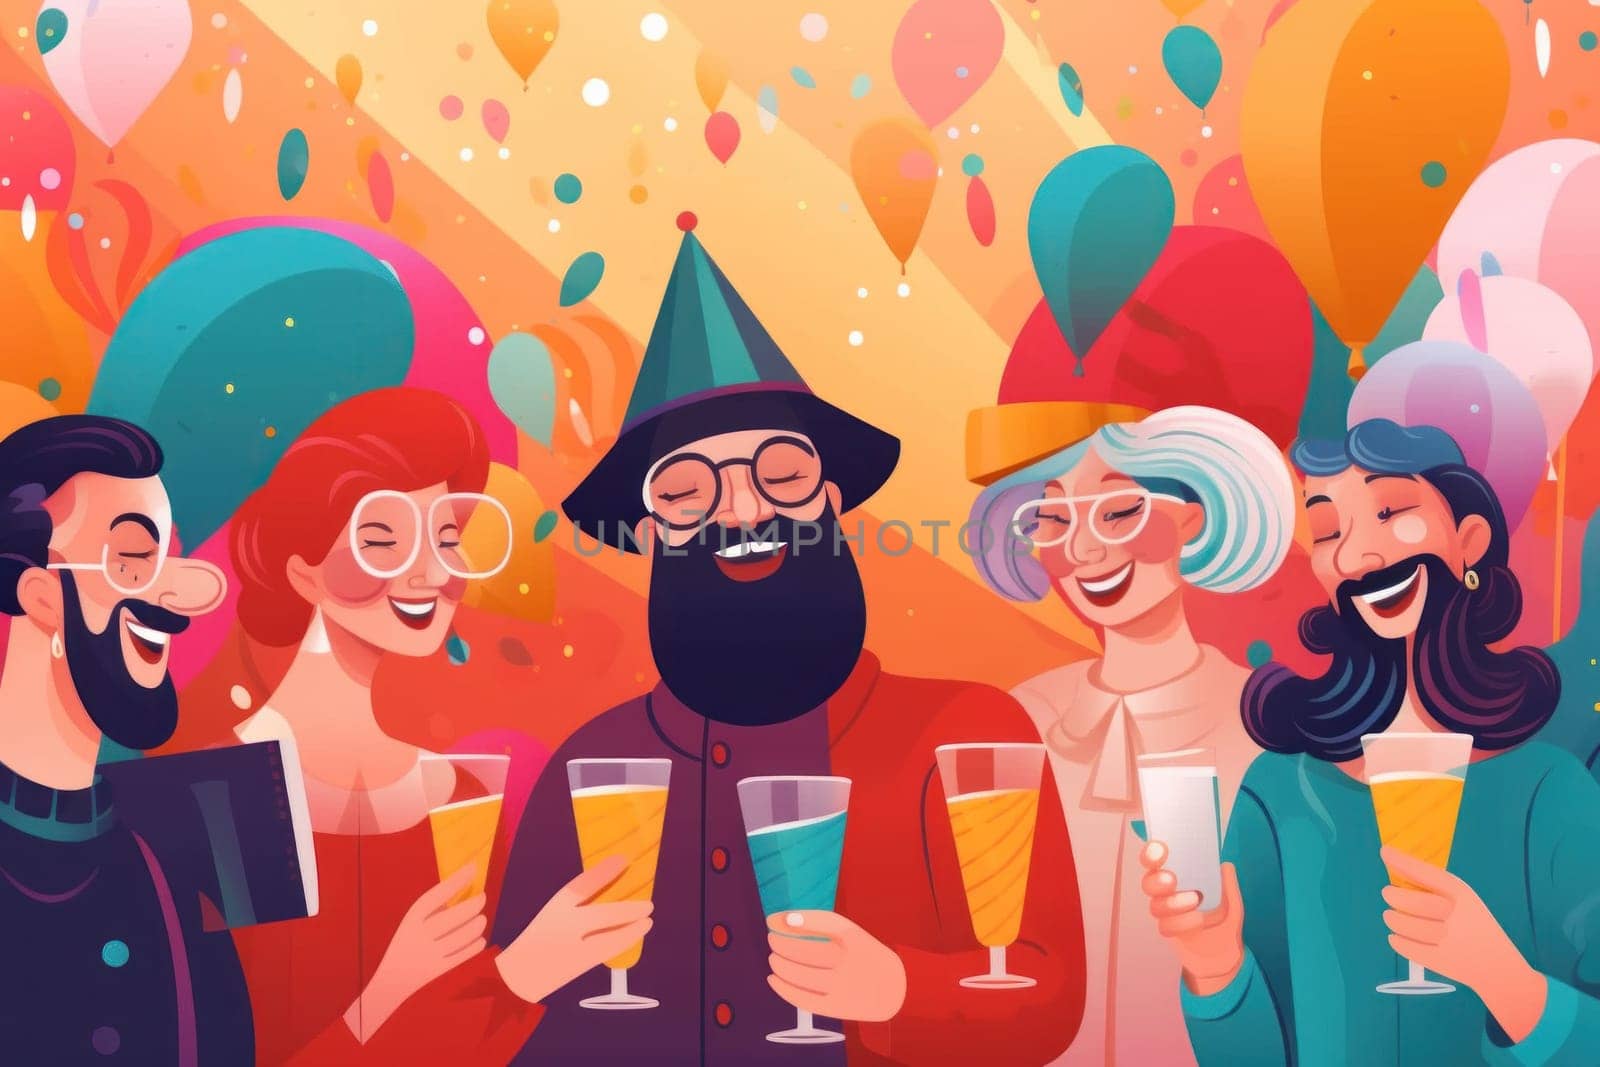 a diverse people wearing colorful party hats Celebrate new year party, illustration.